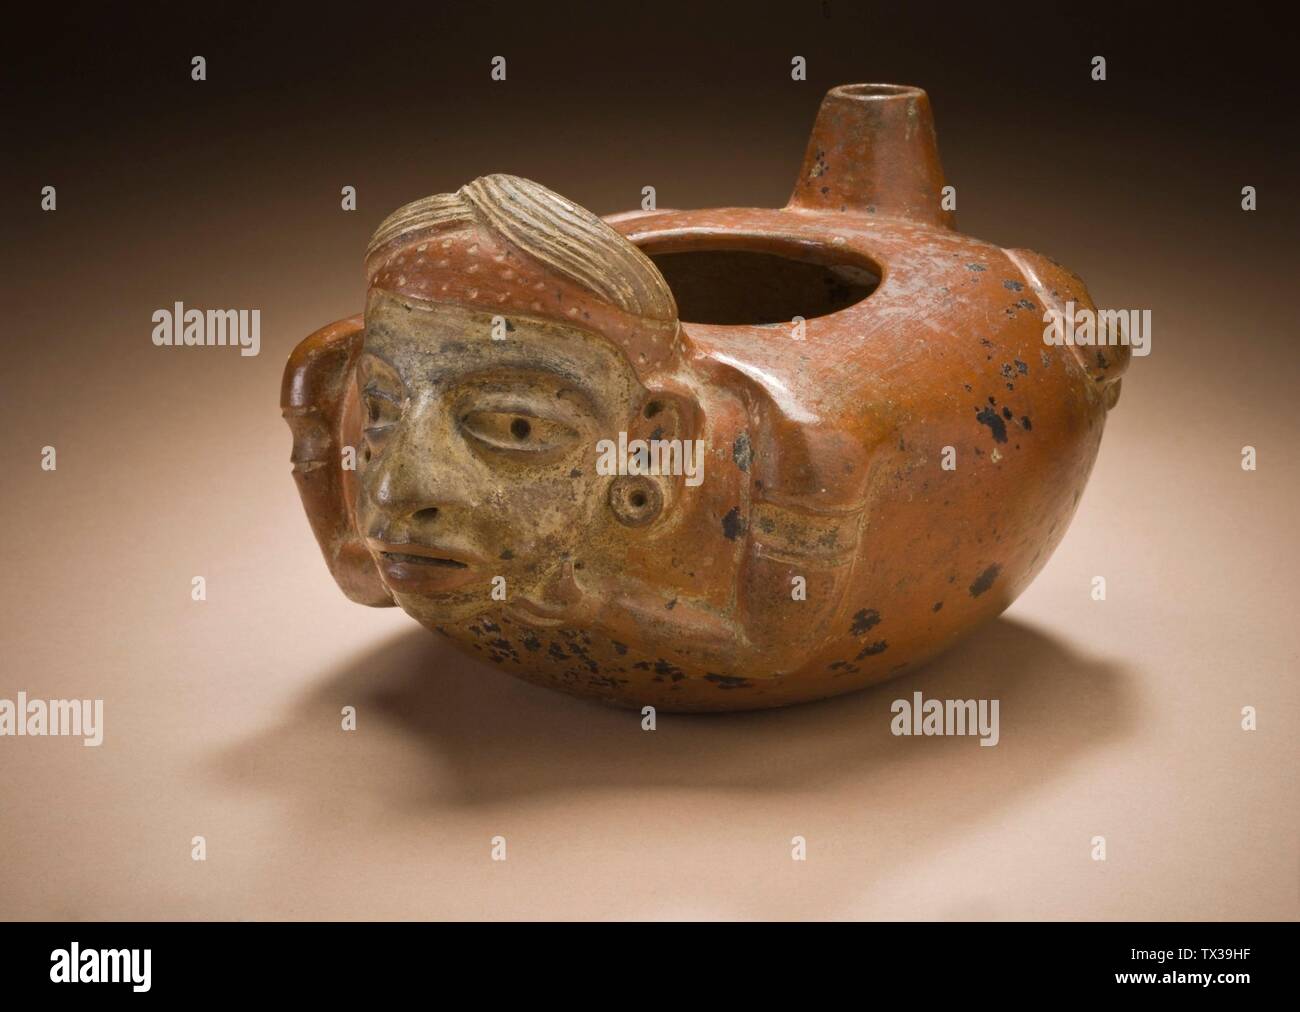 Figural Vessel with Spout (image 2 of 2);  Guatemala, Southern Highlands, Maya, 100-300 Furnishings; Serviceware Burnished and slipped ceramic 4 1/8 x 6 3/4 x 5 1/2 in. (10.48 x 17.15 x 13.97 cm) Purchased with funds provided by the Joan Palevsky Bequest (M.2006.101) Art of the Ancient Americas Currently on public view: Art of the Americas Building, floor 4; 100-300; Stock Photo